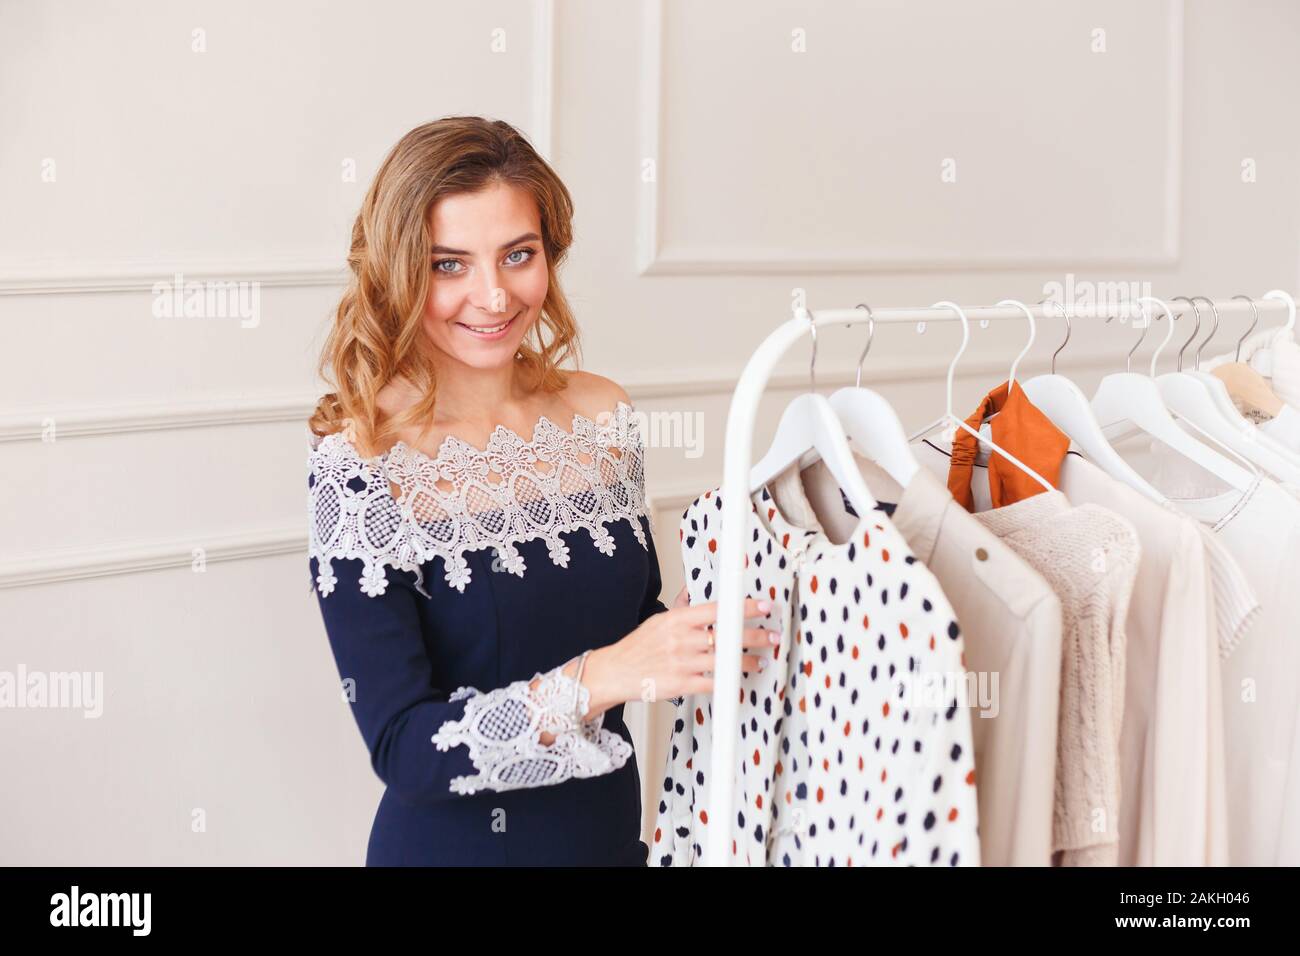 Young woman choosing clothes on a rack for the party Stock Photo